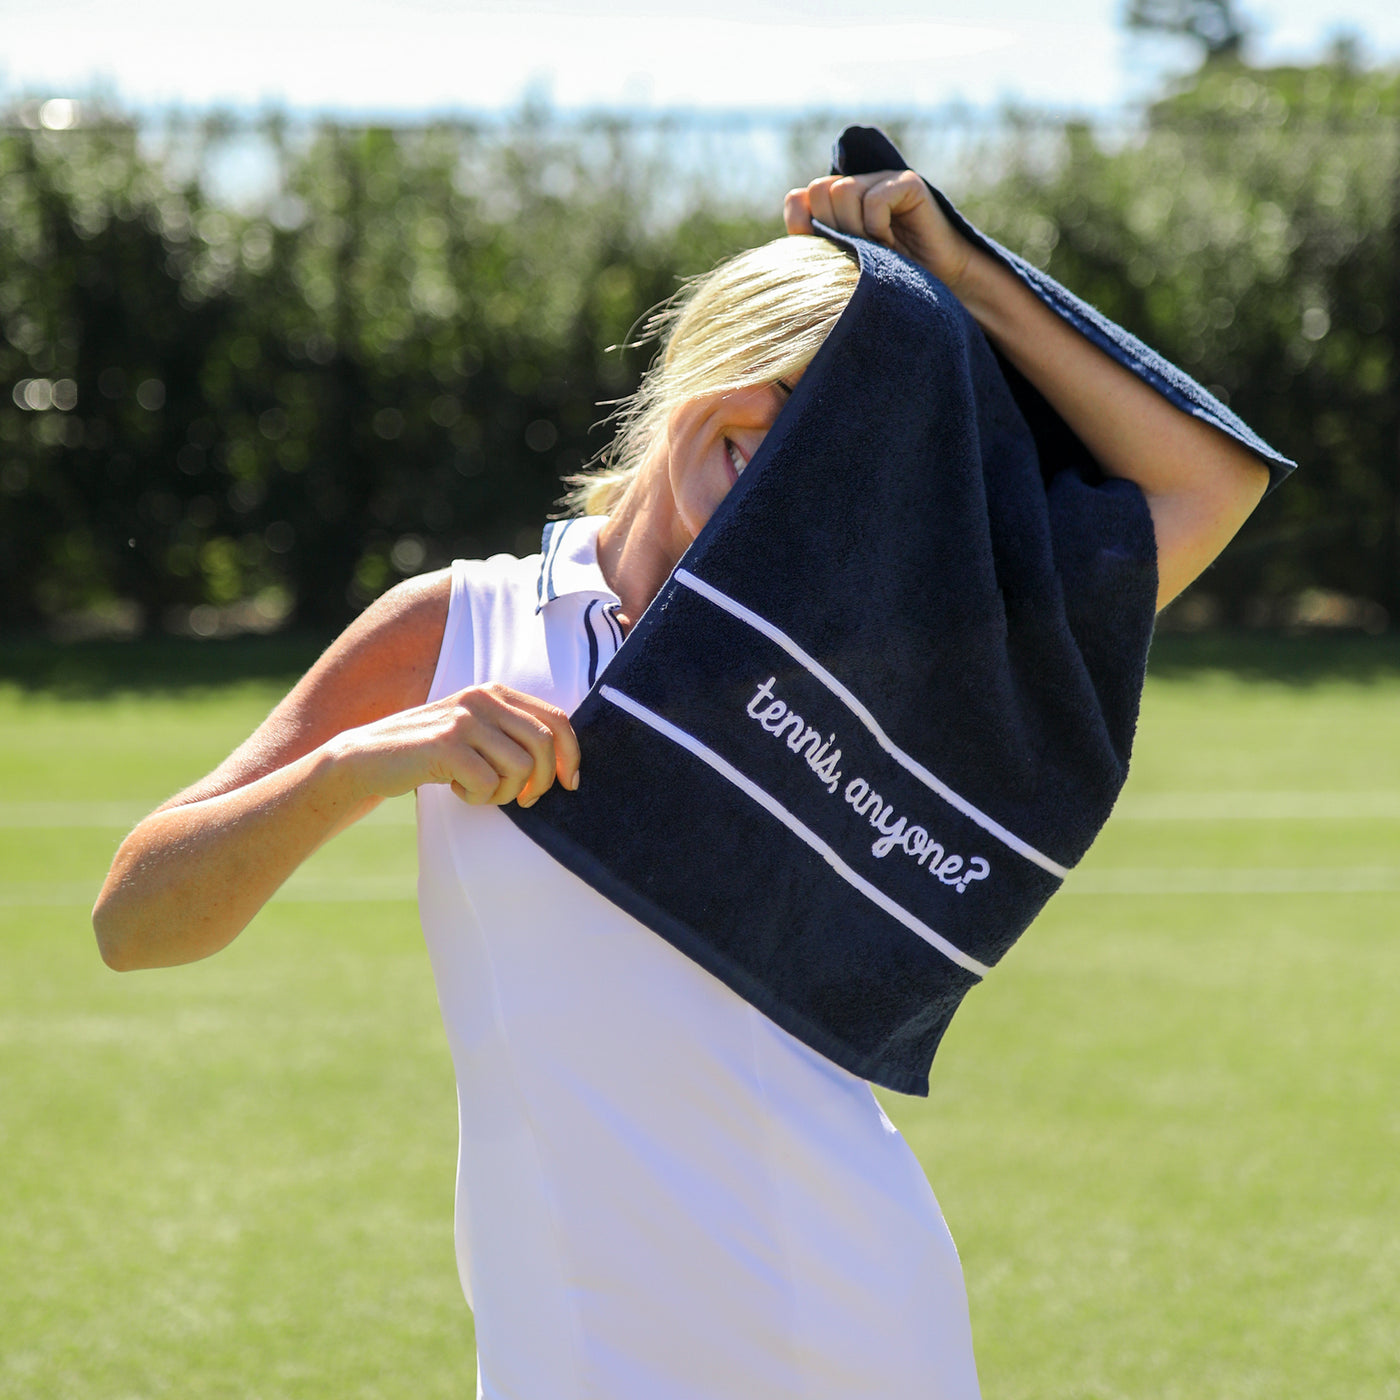 Model stands on tennis court holding Navy cotton terry towel with the words "tennis anyone" embroidered in a cursive font in white on the bottom of the towel.